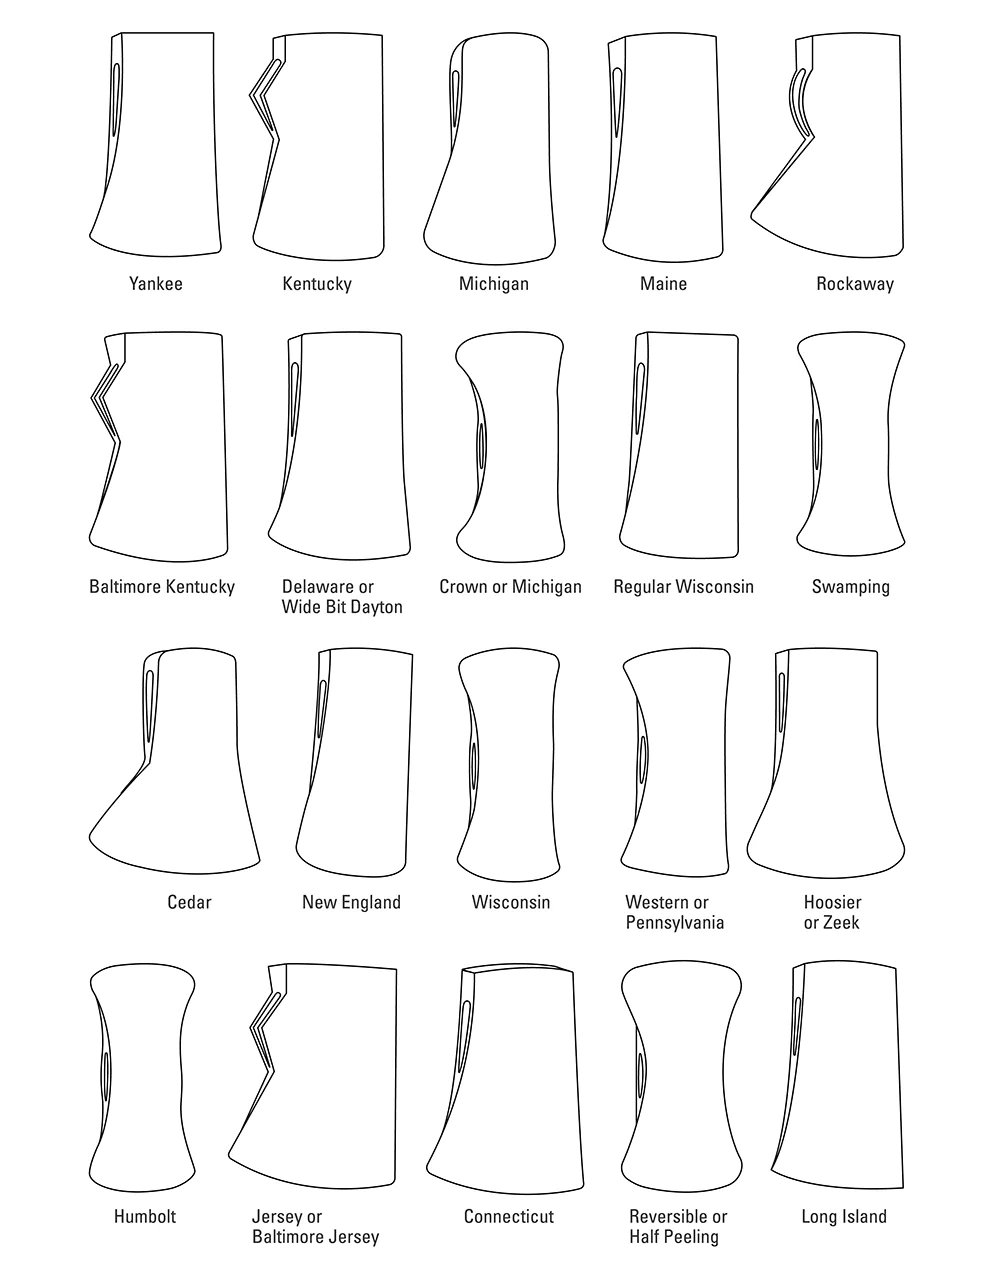 Axe Patterns laid out